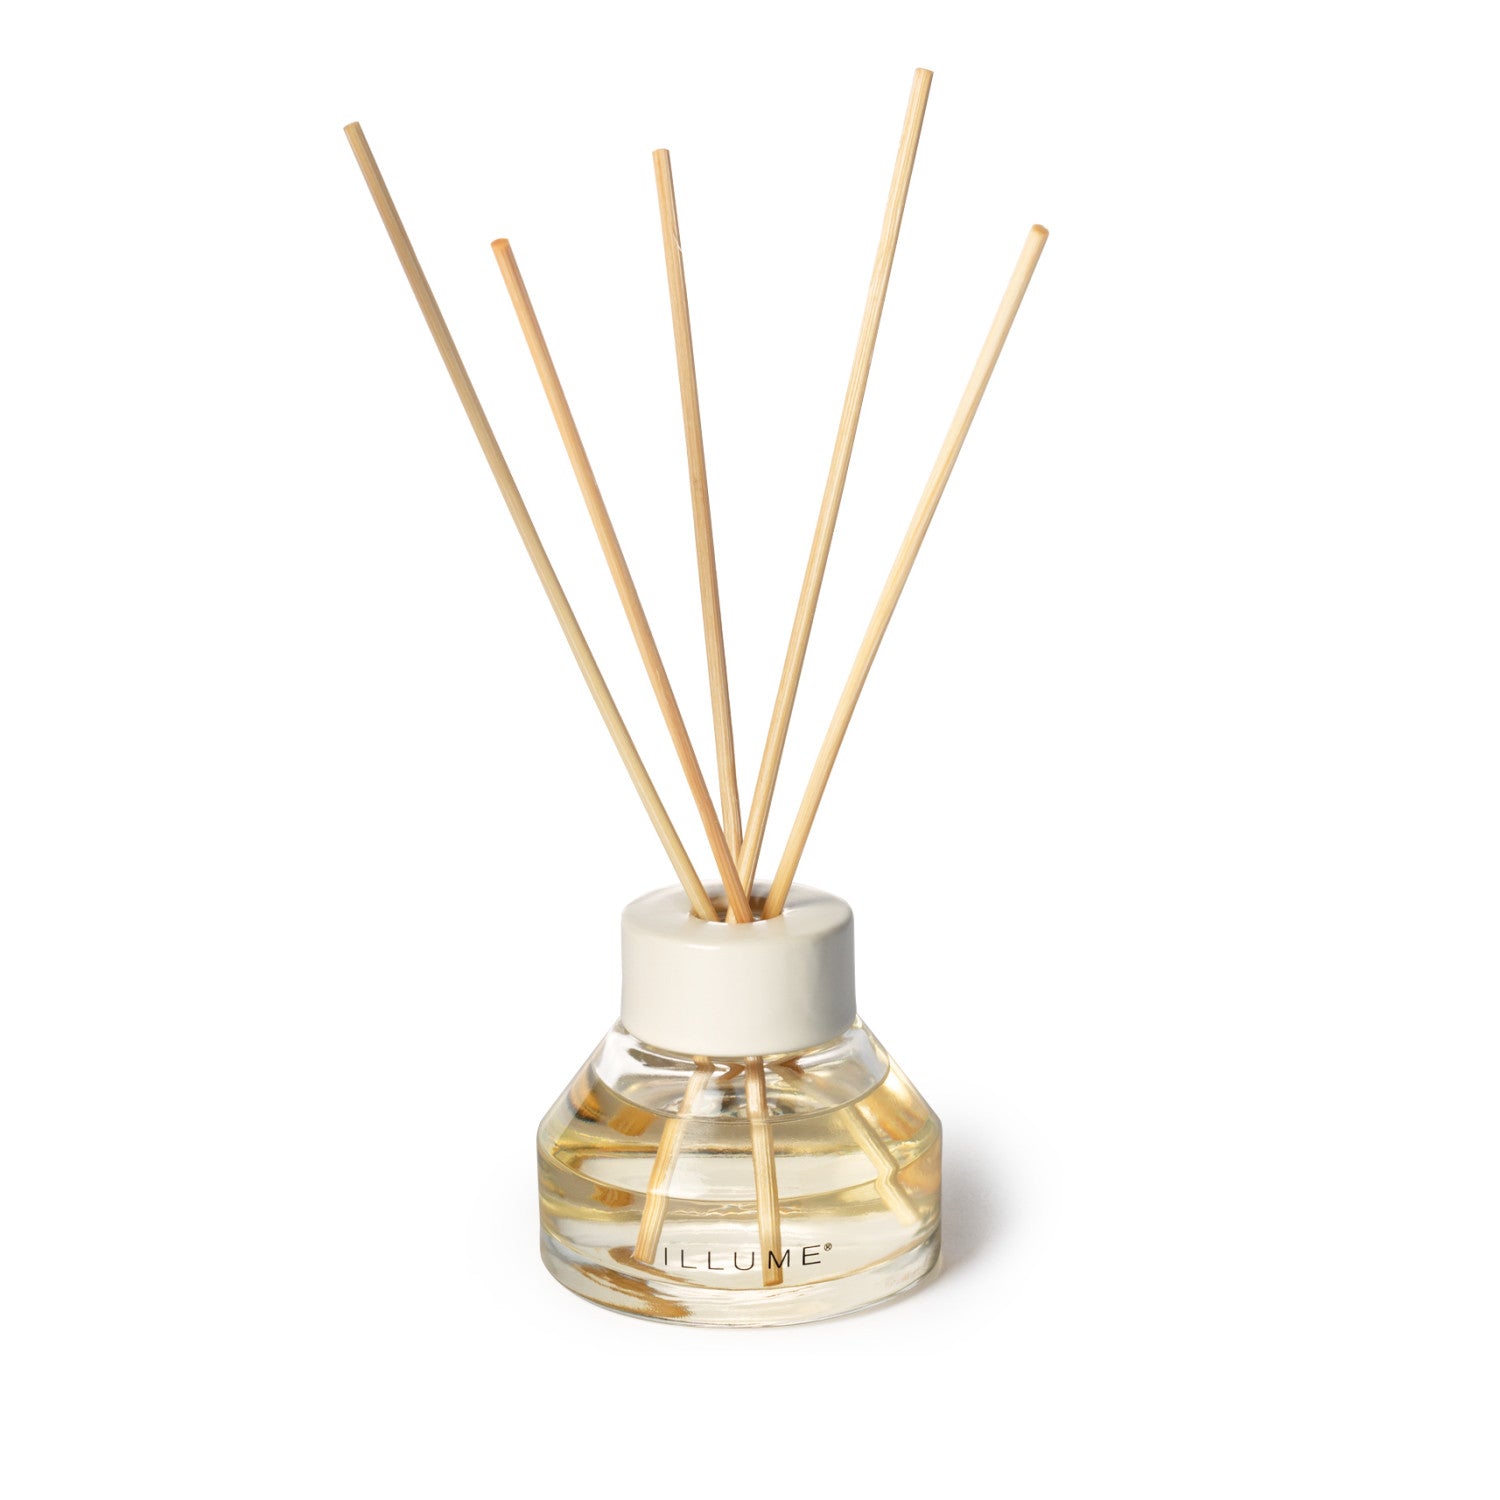 Blackberry Absinthe Fragrance Oil Diffuser and Reeds in Jar with White Collar